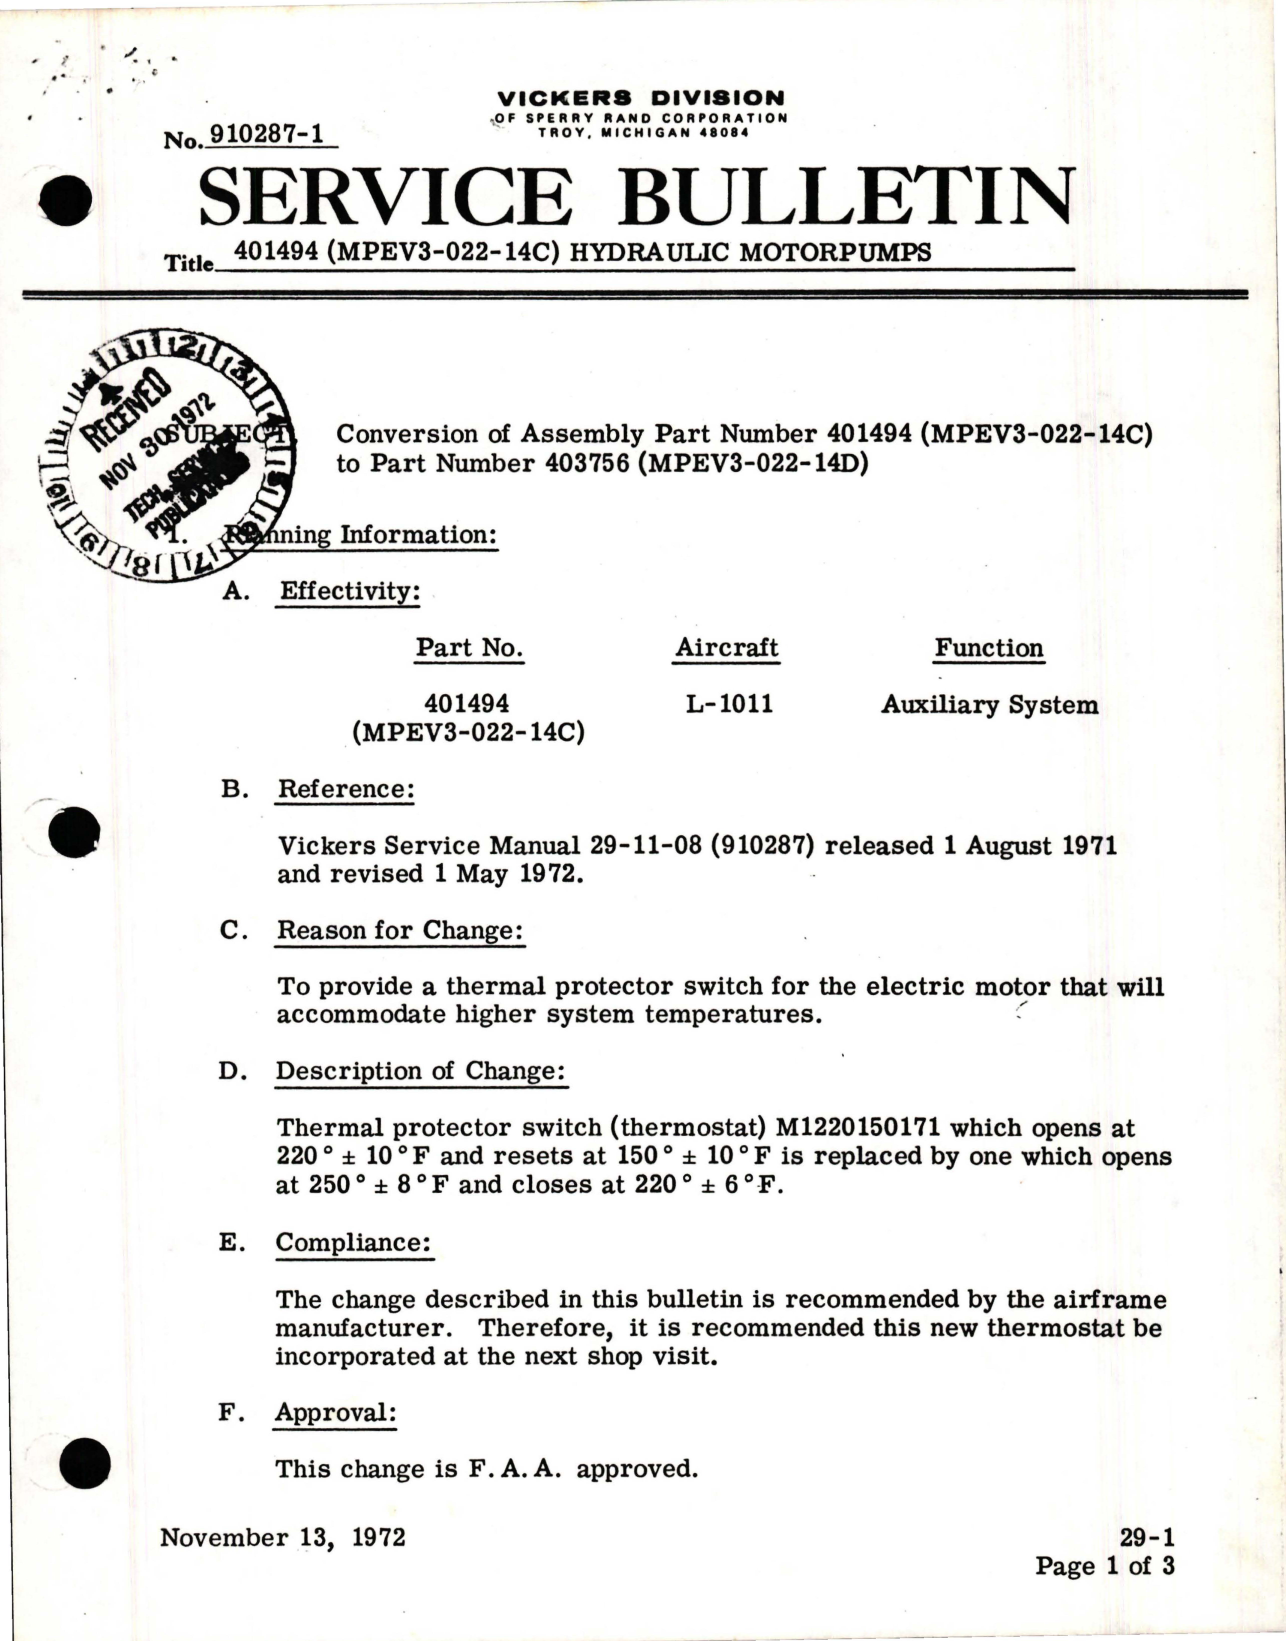 Sample page 1 from AirCorps Library document: Conversion of Assembly Part 401494 to Part 403756 - Hydraulic Motorpumps 